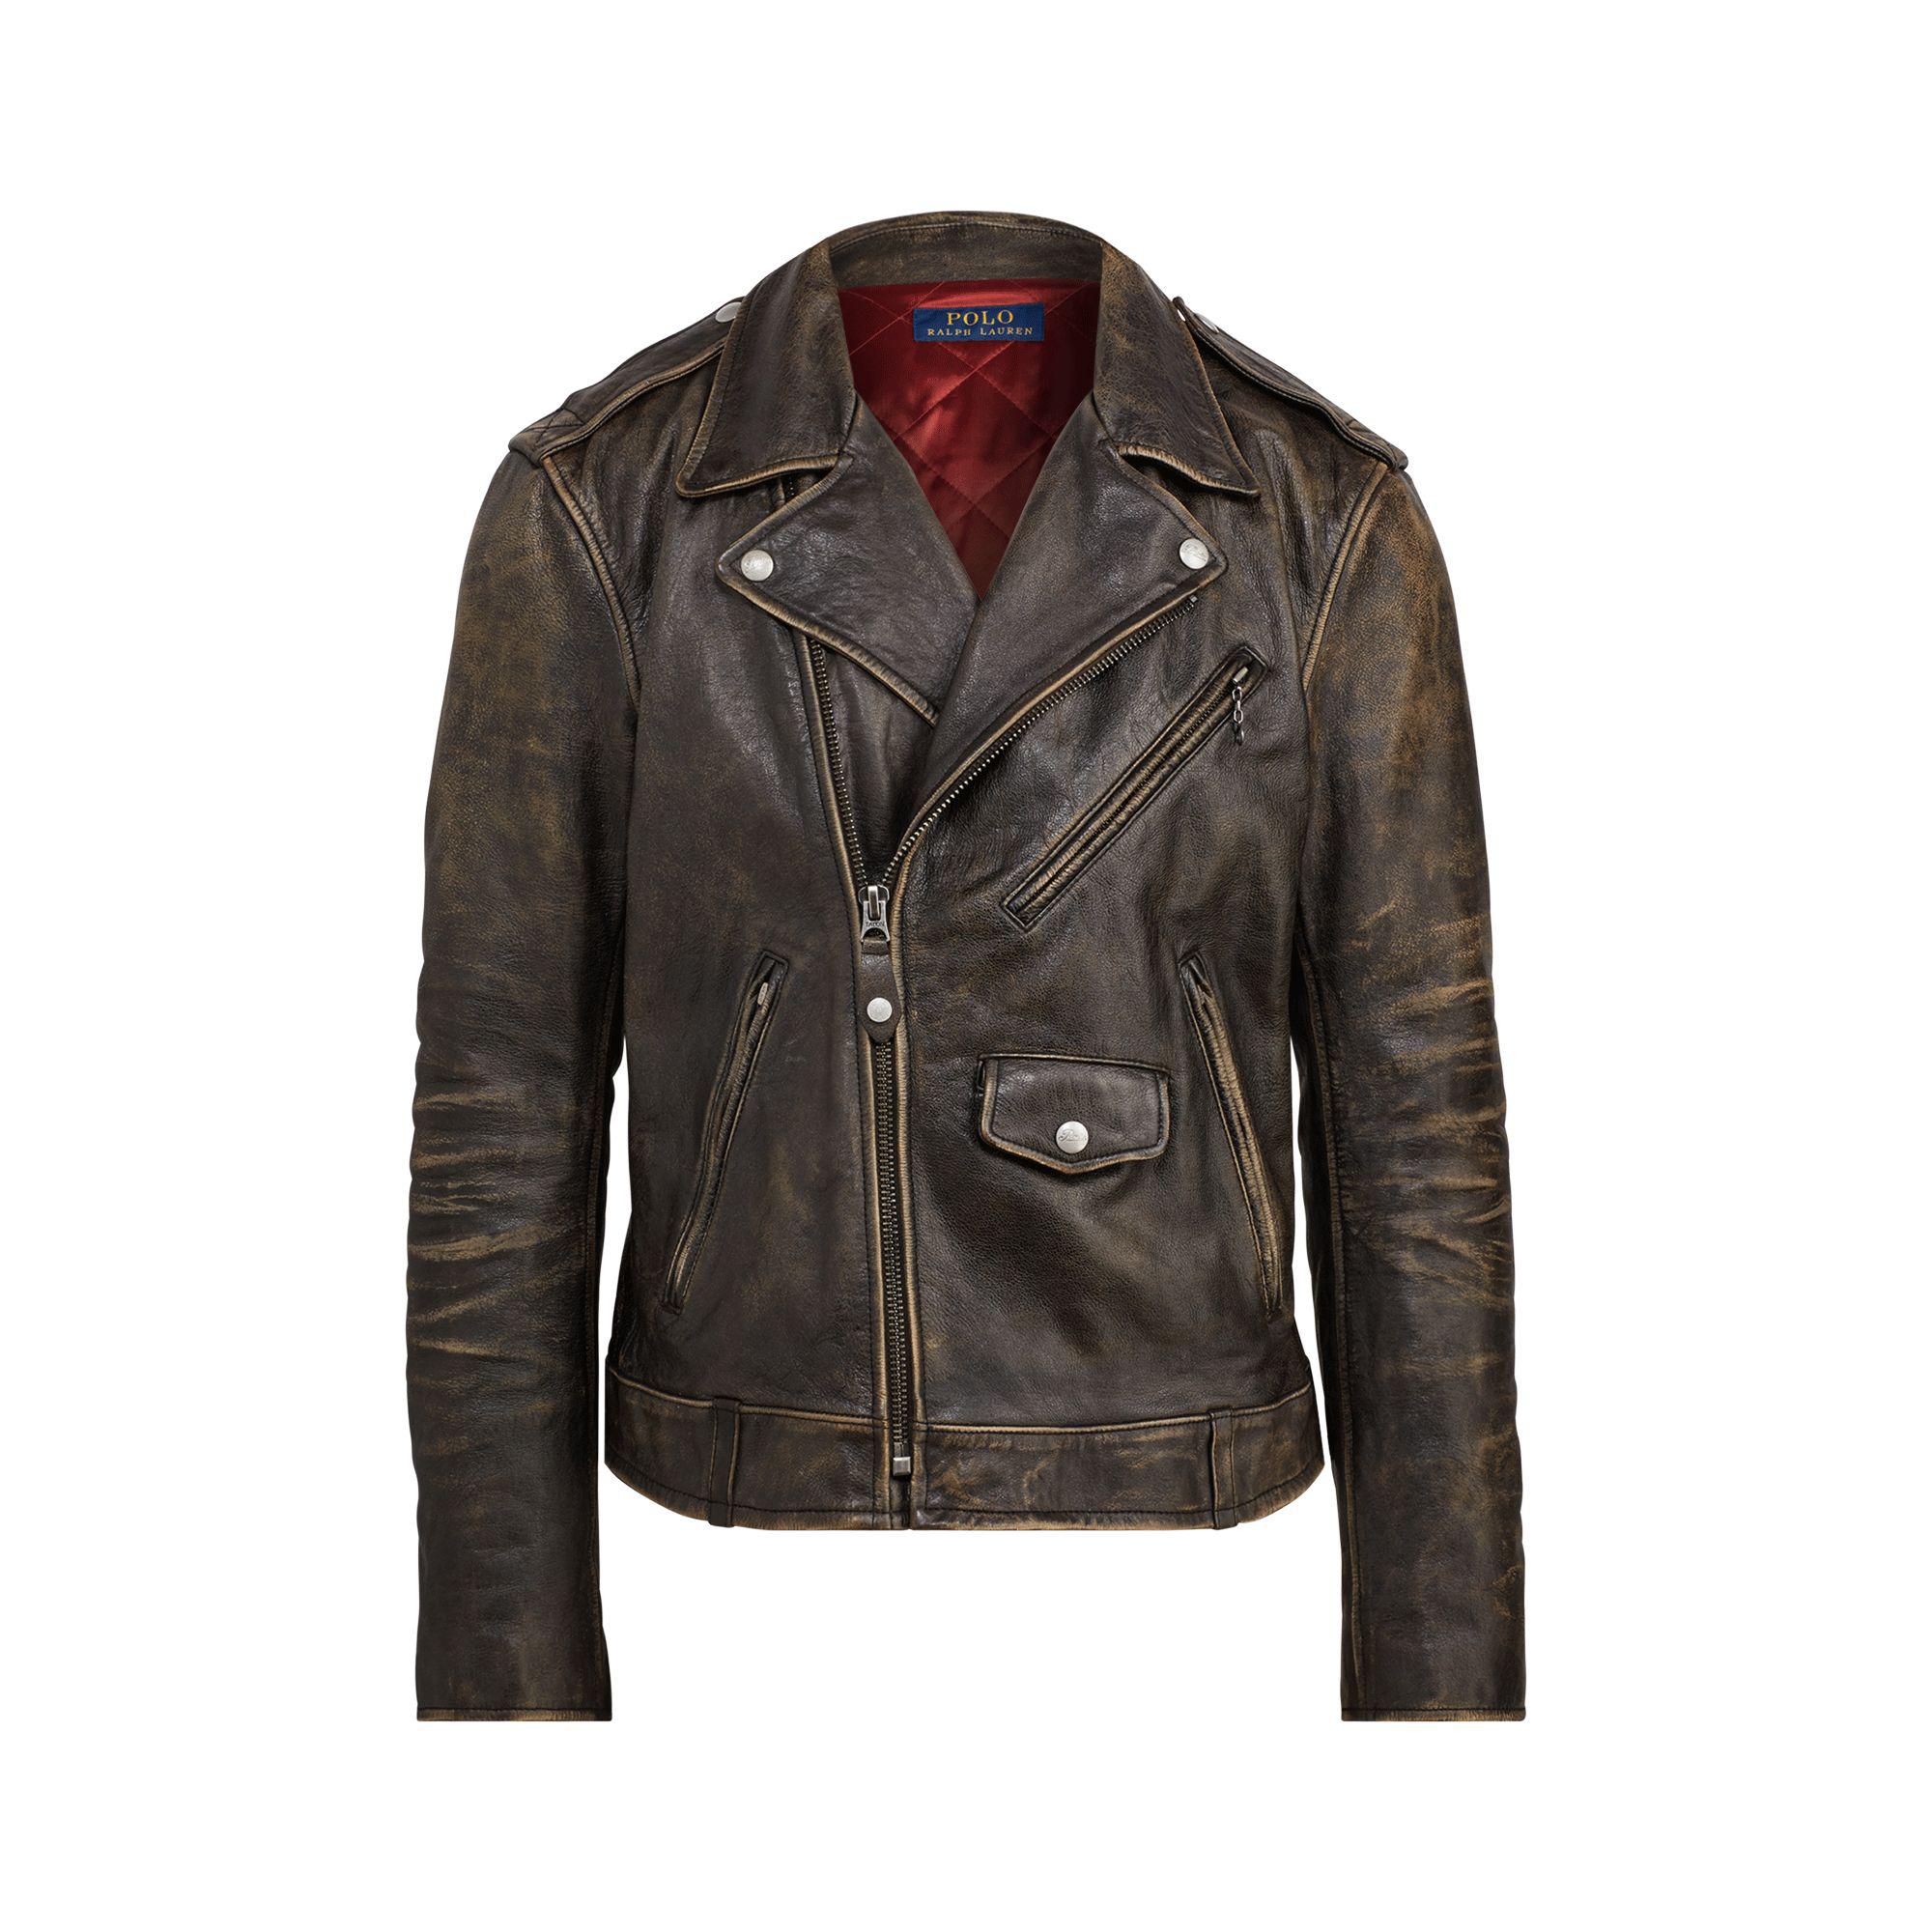 Polo Ralph Lauren Leather The Iconic Motorcycle Jacket for Men - Lyst